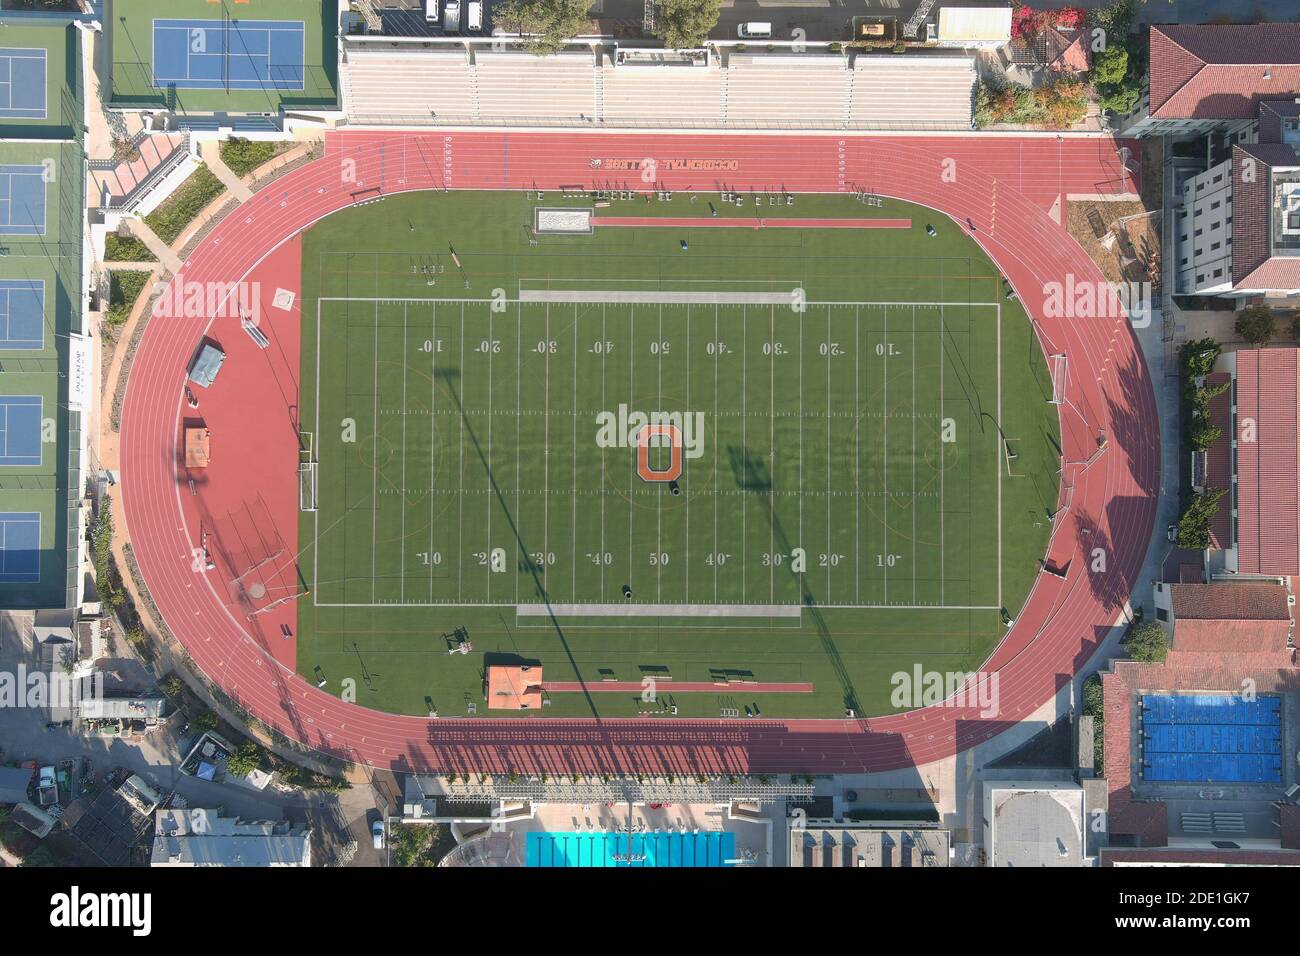 Los Angeles, United States. 24th Nov, 2020. A general view of the track